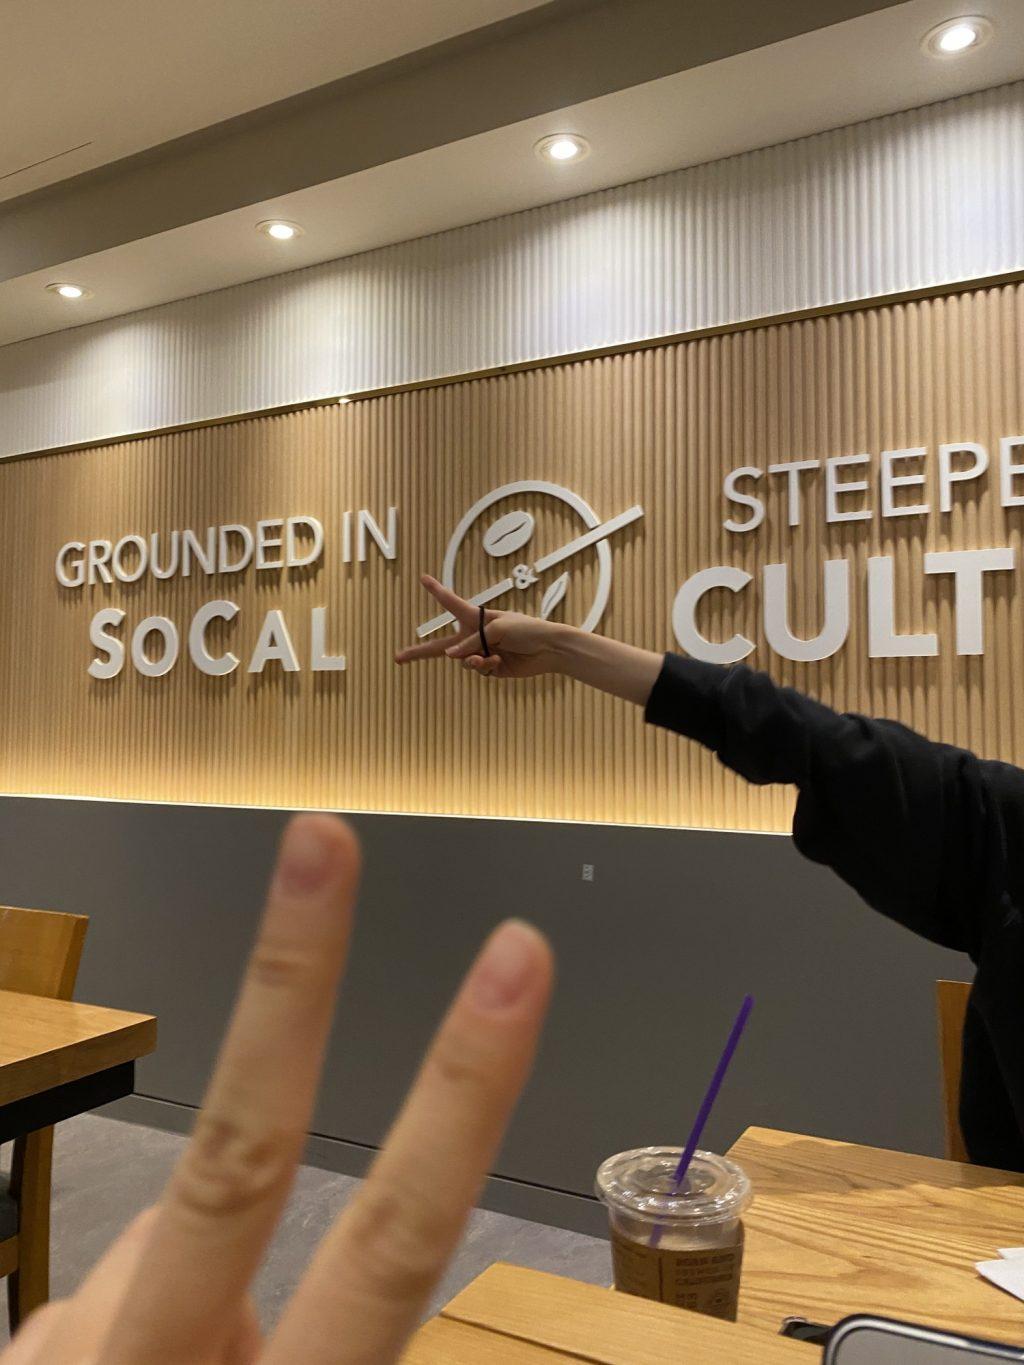 My roommate and I hold up peace signs while taking a break from our online studies at a local Coffee Bean on Oct. 24. I was reminded of home with the "Grounded in SoCal" sign on the wall and the American music playing inside. Photo by Claire Lee